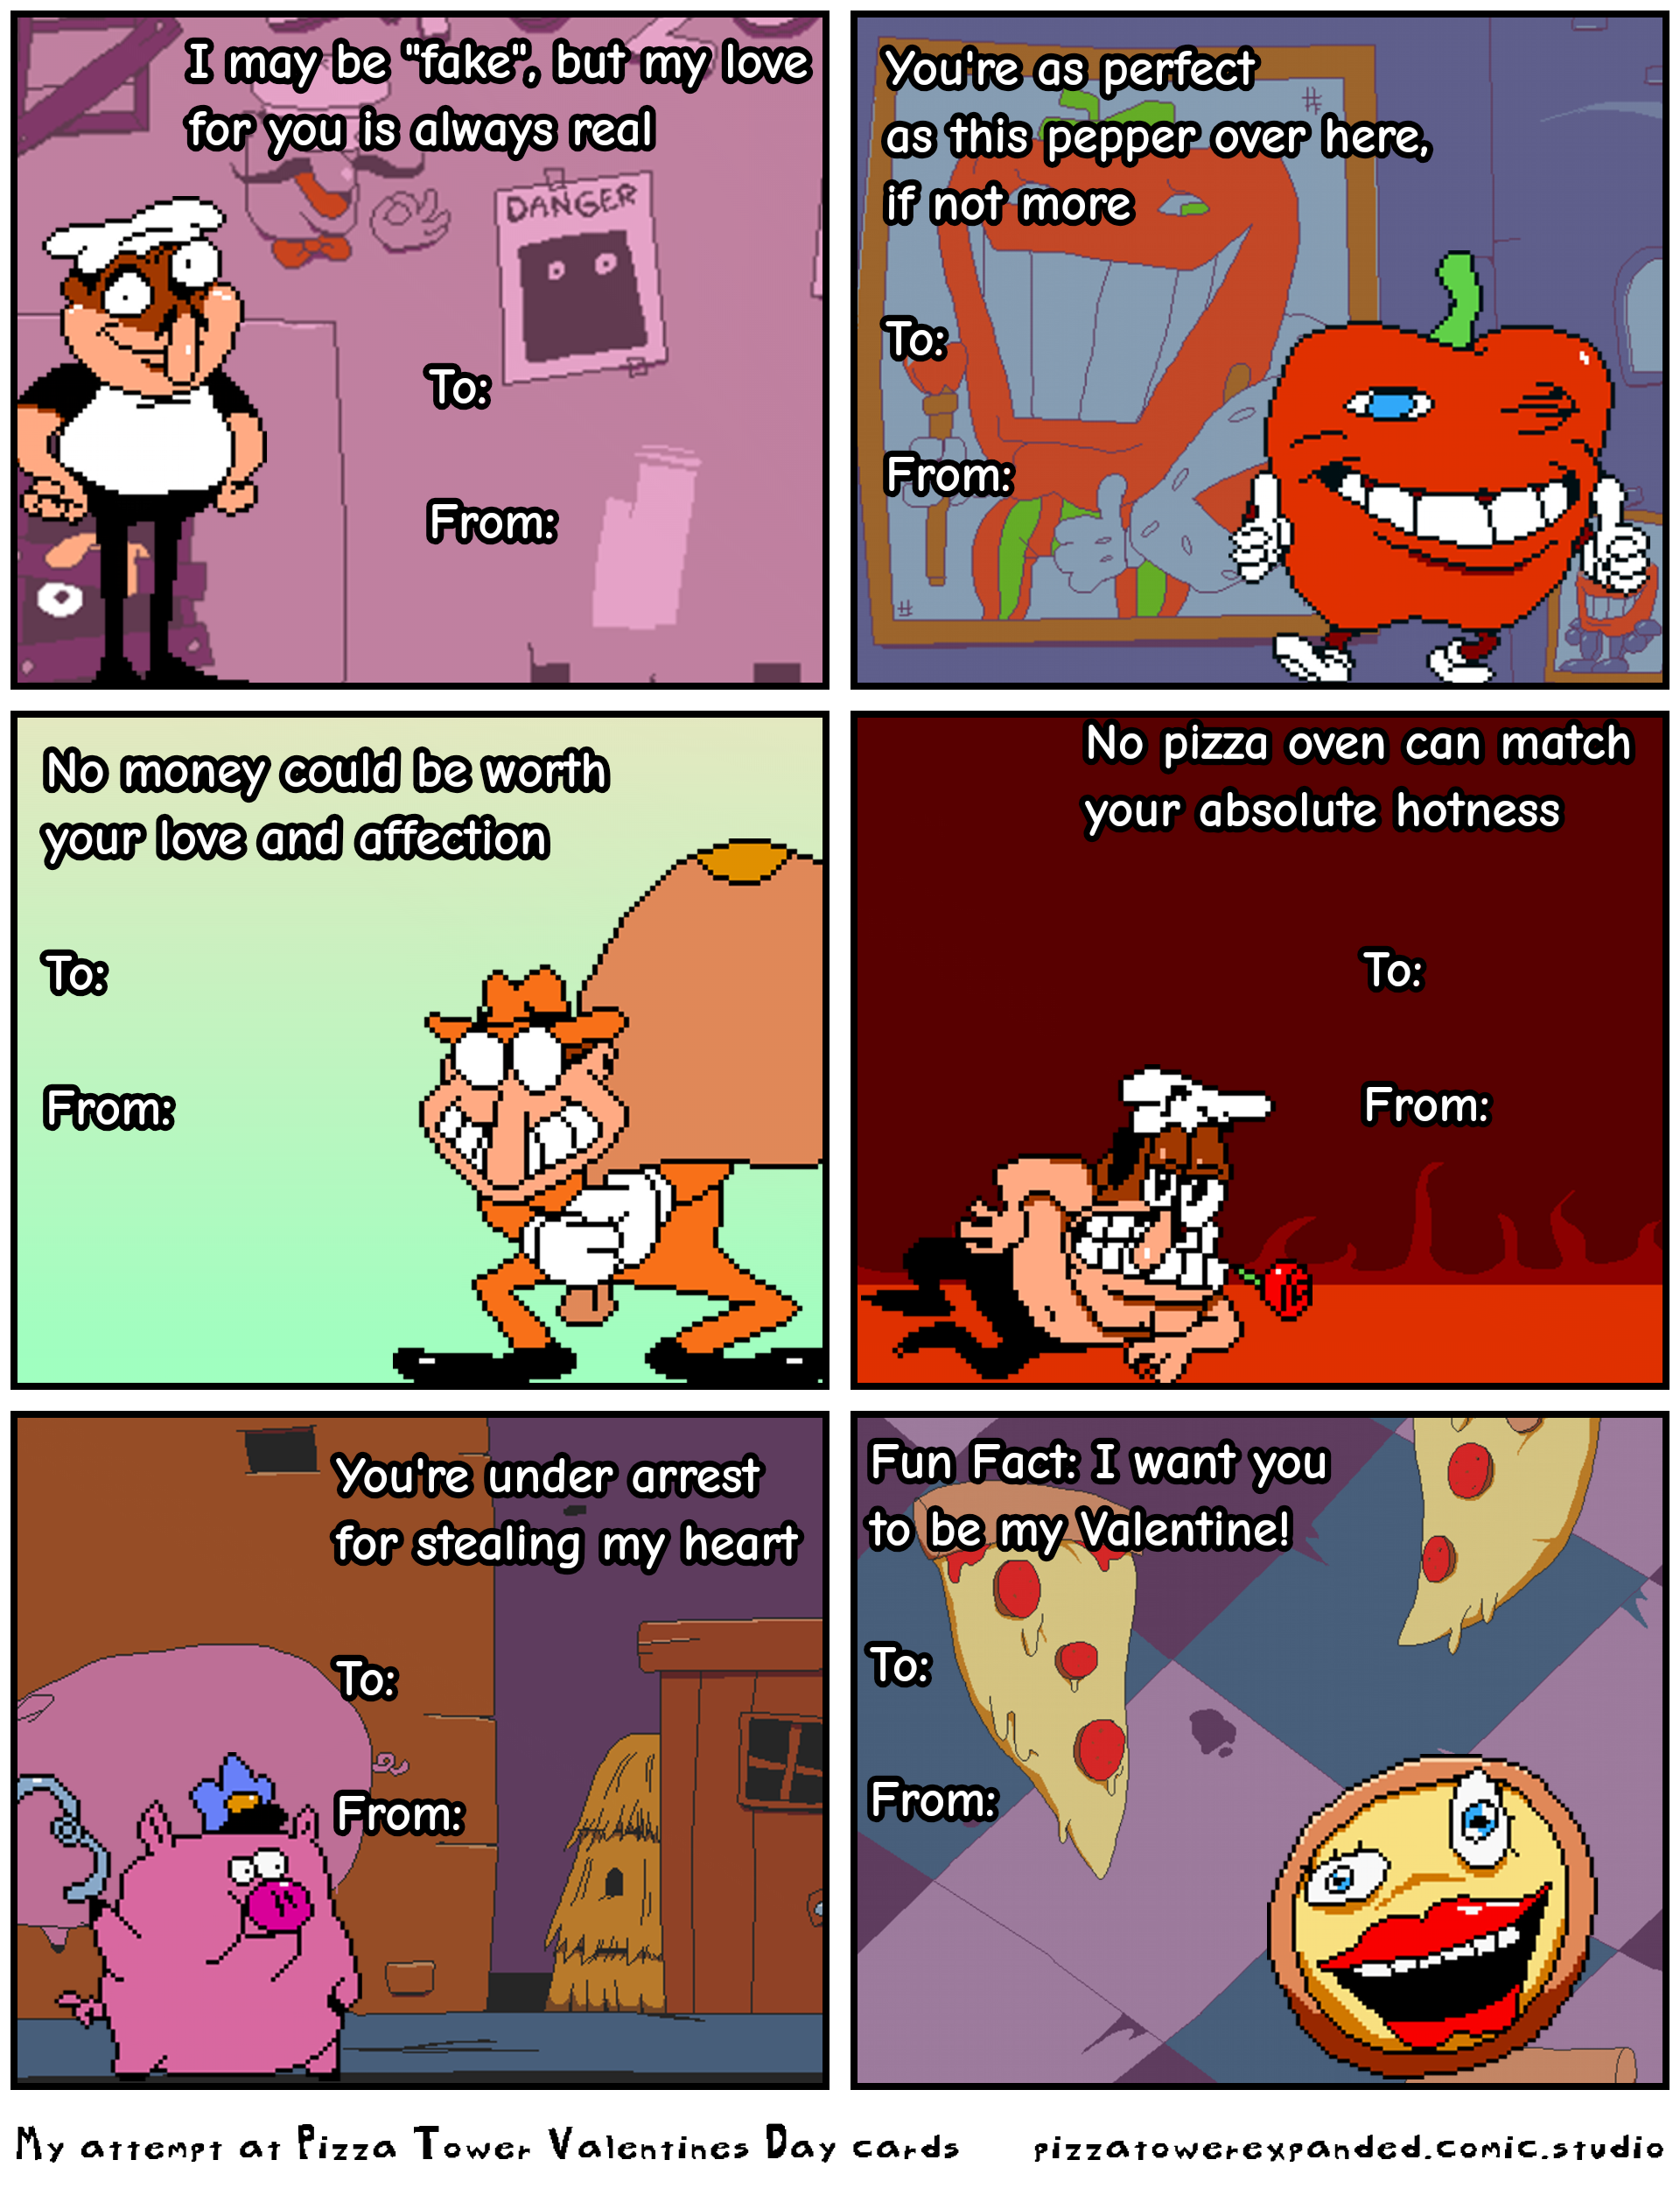 My attempt at Pizza Tower Valentines Day cards